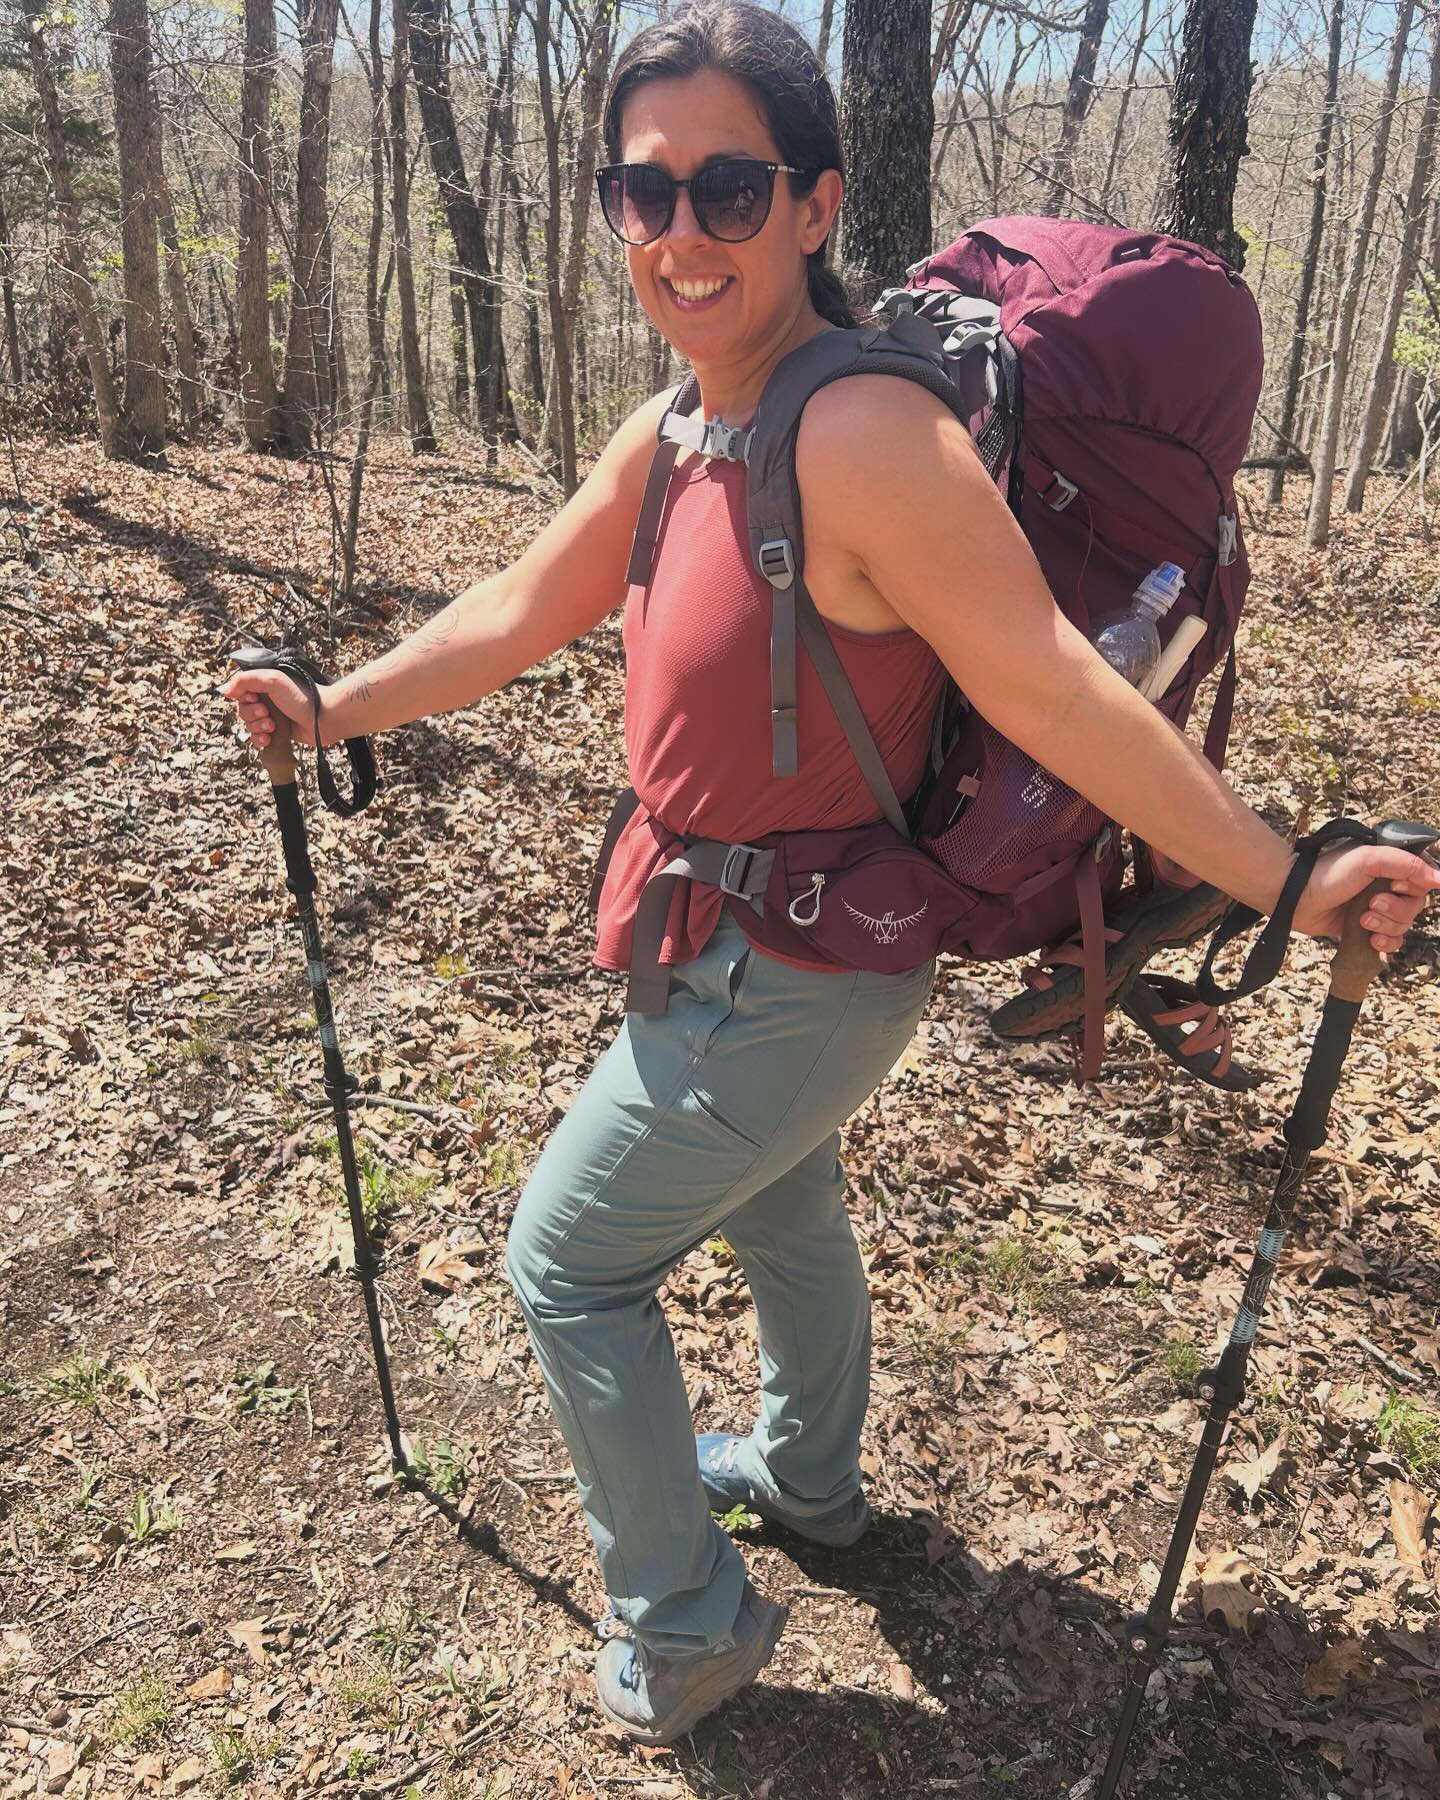 Last week, my husband and I went on a fun backpacking/paddling trip with some good friends..  We spent two days hiking from Onondaga Cave State Park along the Ozark Trail to Bass River Resort, stayed another night there, and then floated back to our 